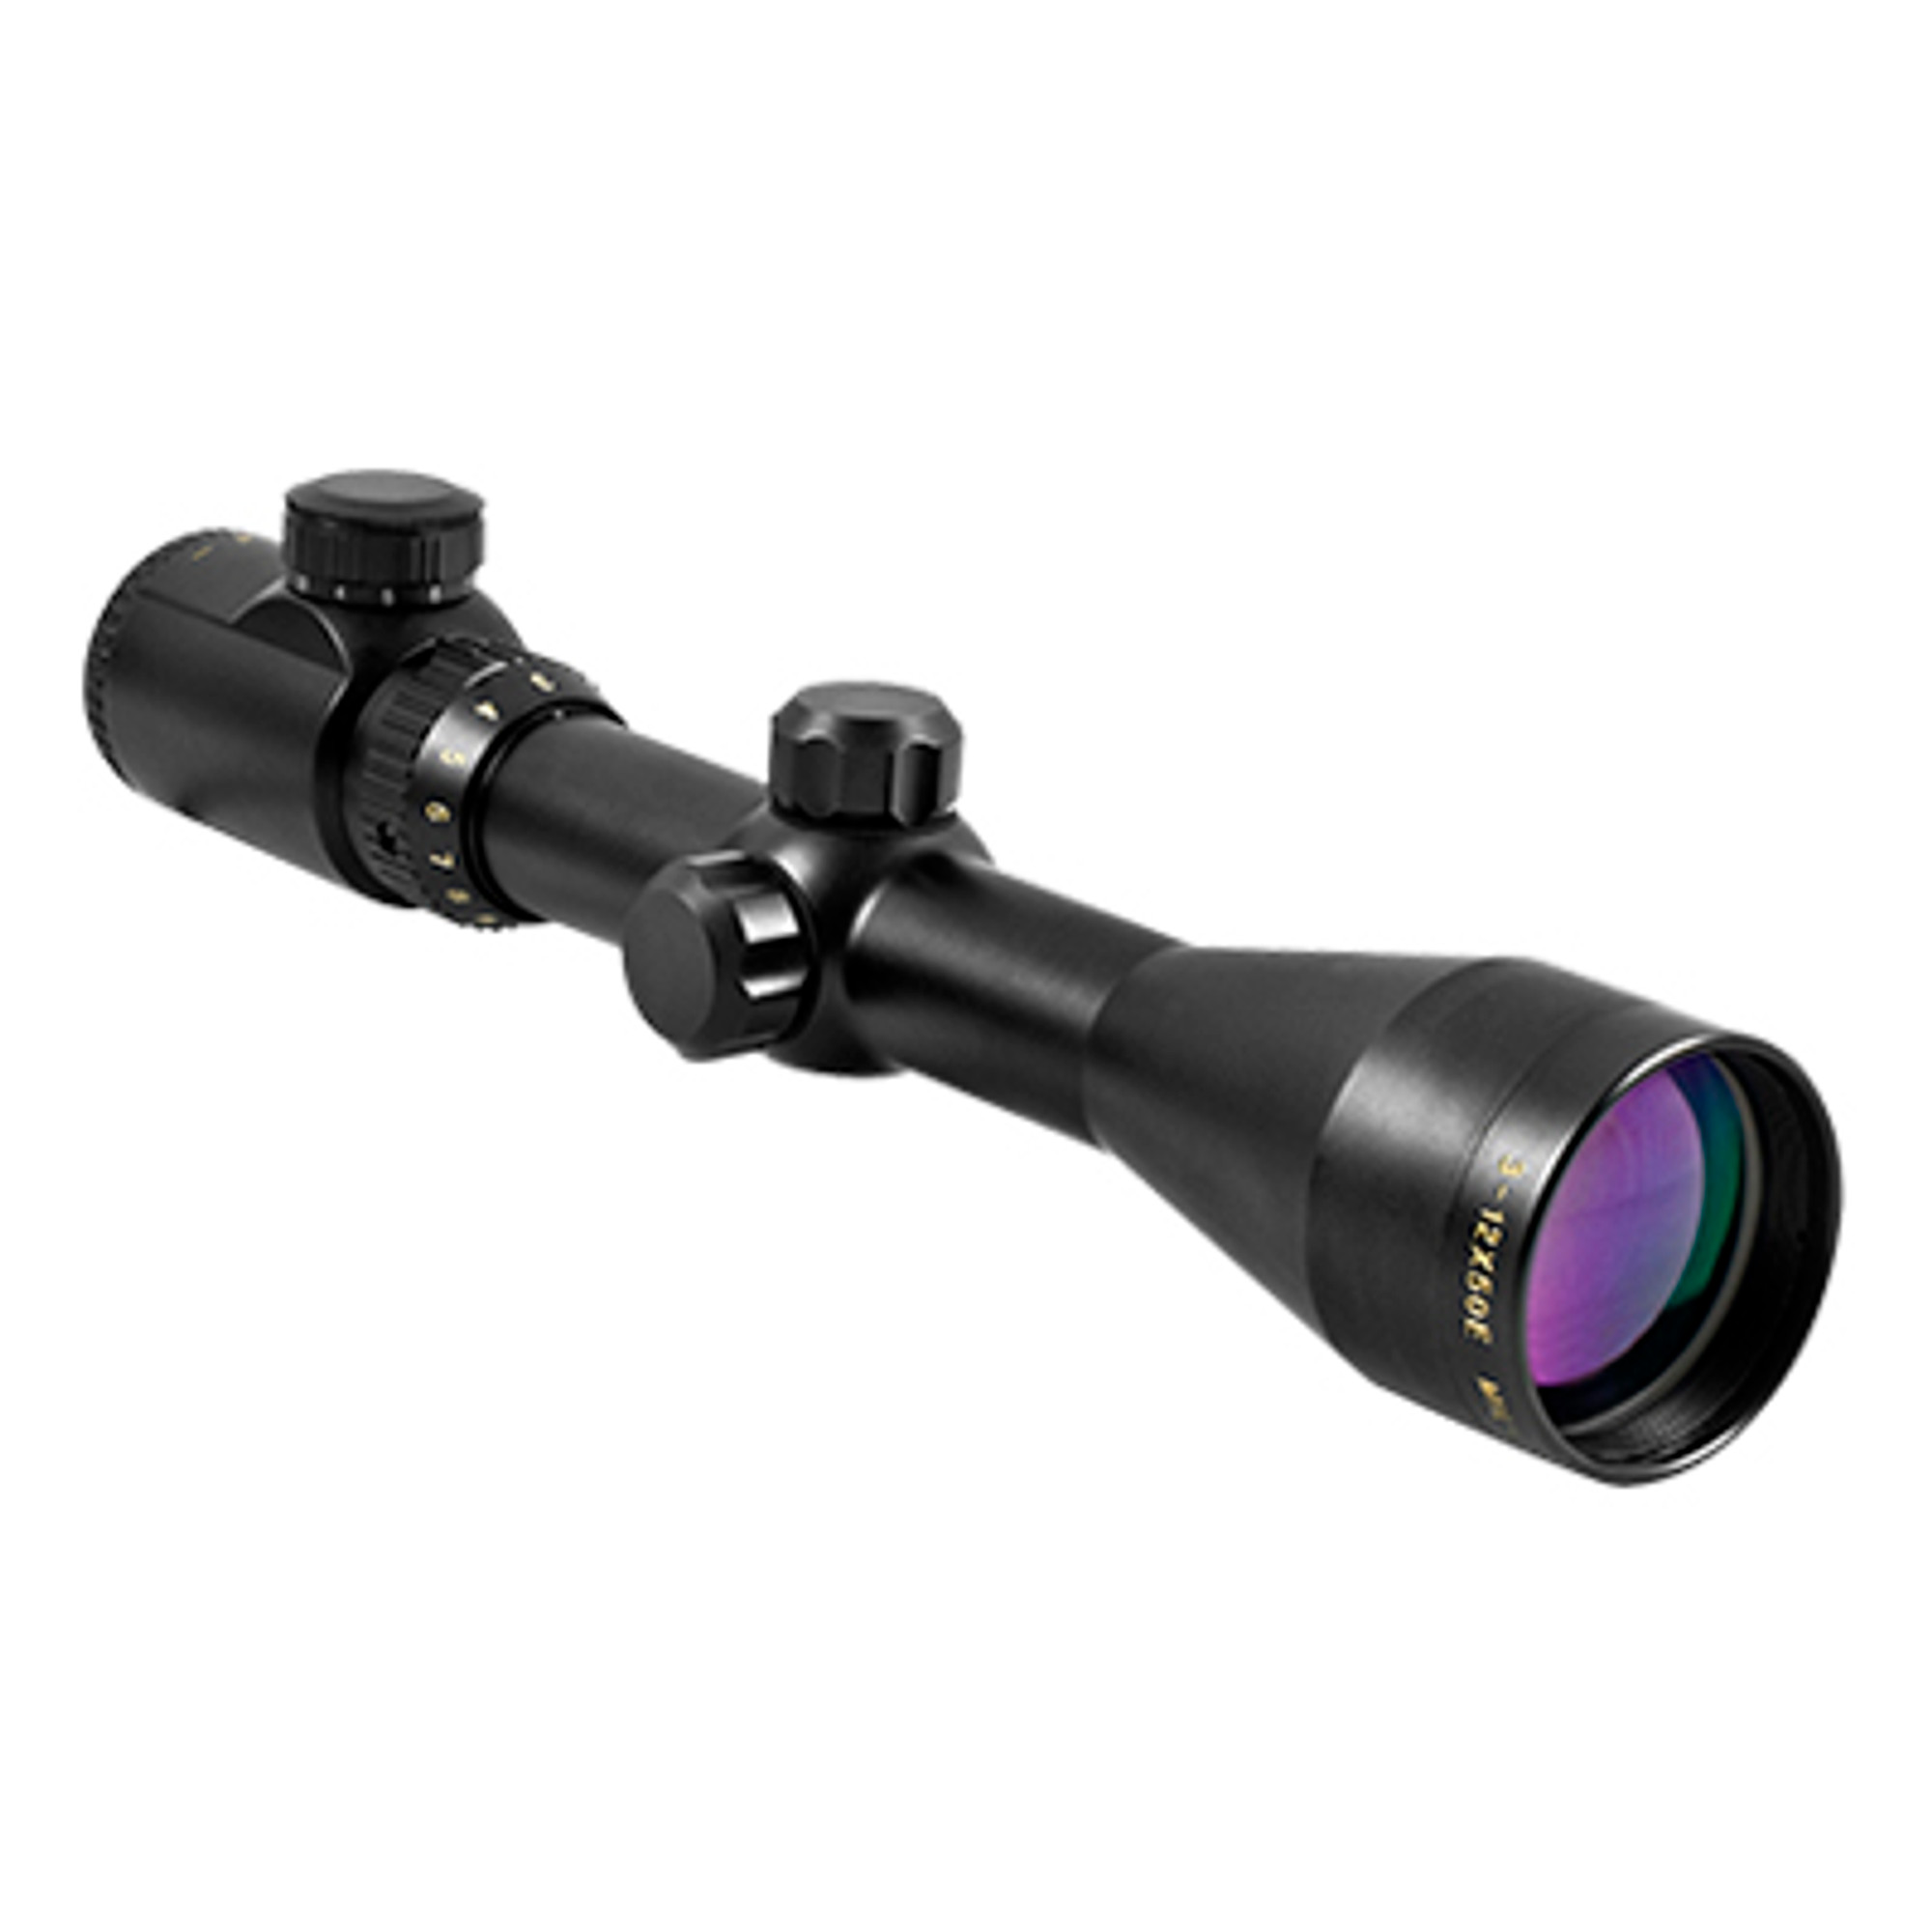 NcStar 3-12X50 Red Ill Reticle/ 30mm Tube